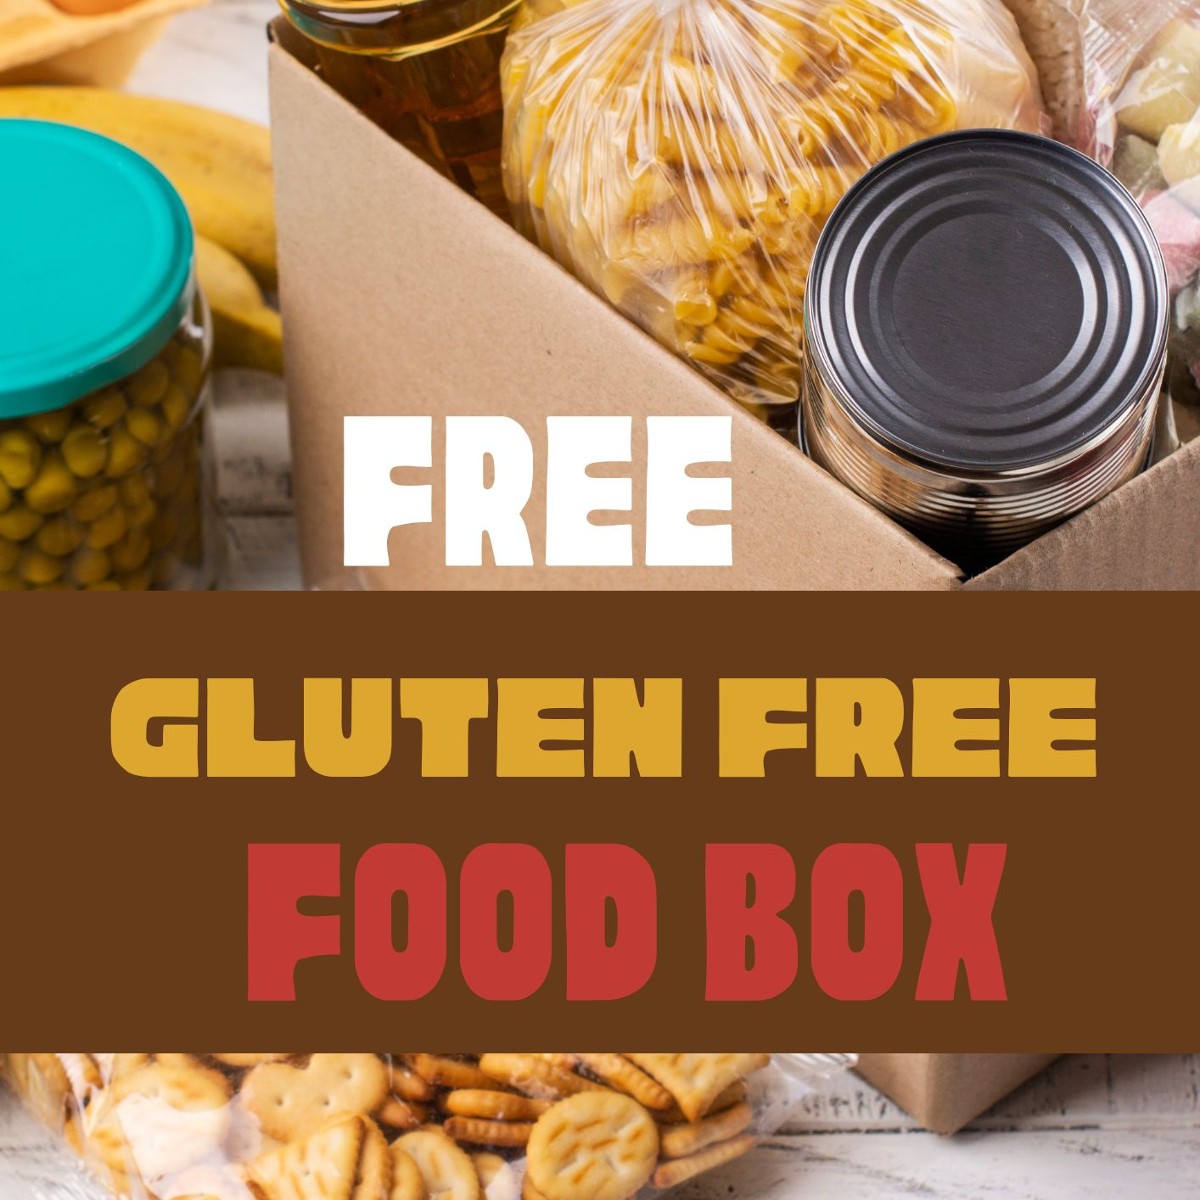 A cardboard box filled with various gluten-free food items, including a bottle of oil, a can of soup, a bag of pasta, a jar of vegetables, a container of crackers, and a bunch of bananas. The box is sitting on a white table with the text "FREE GLUTEN FREE FOOD BOX" written in bold letters across the front.